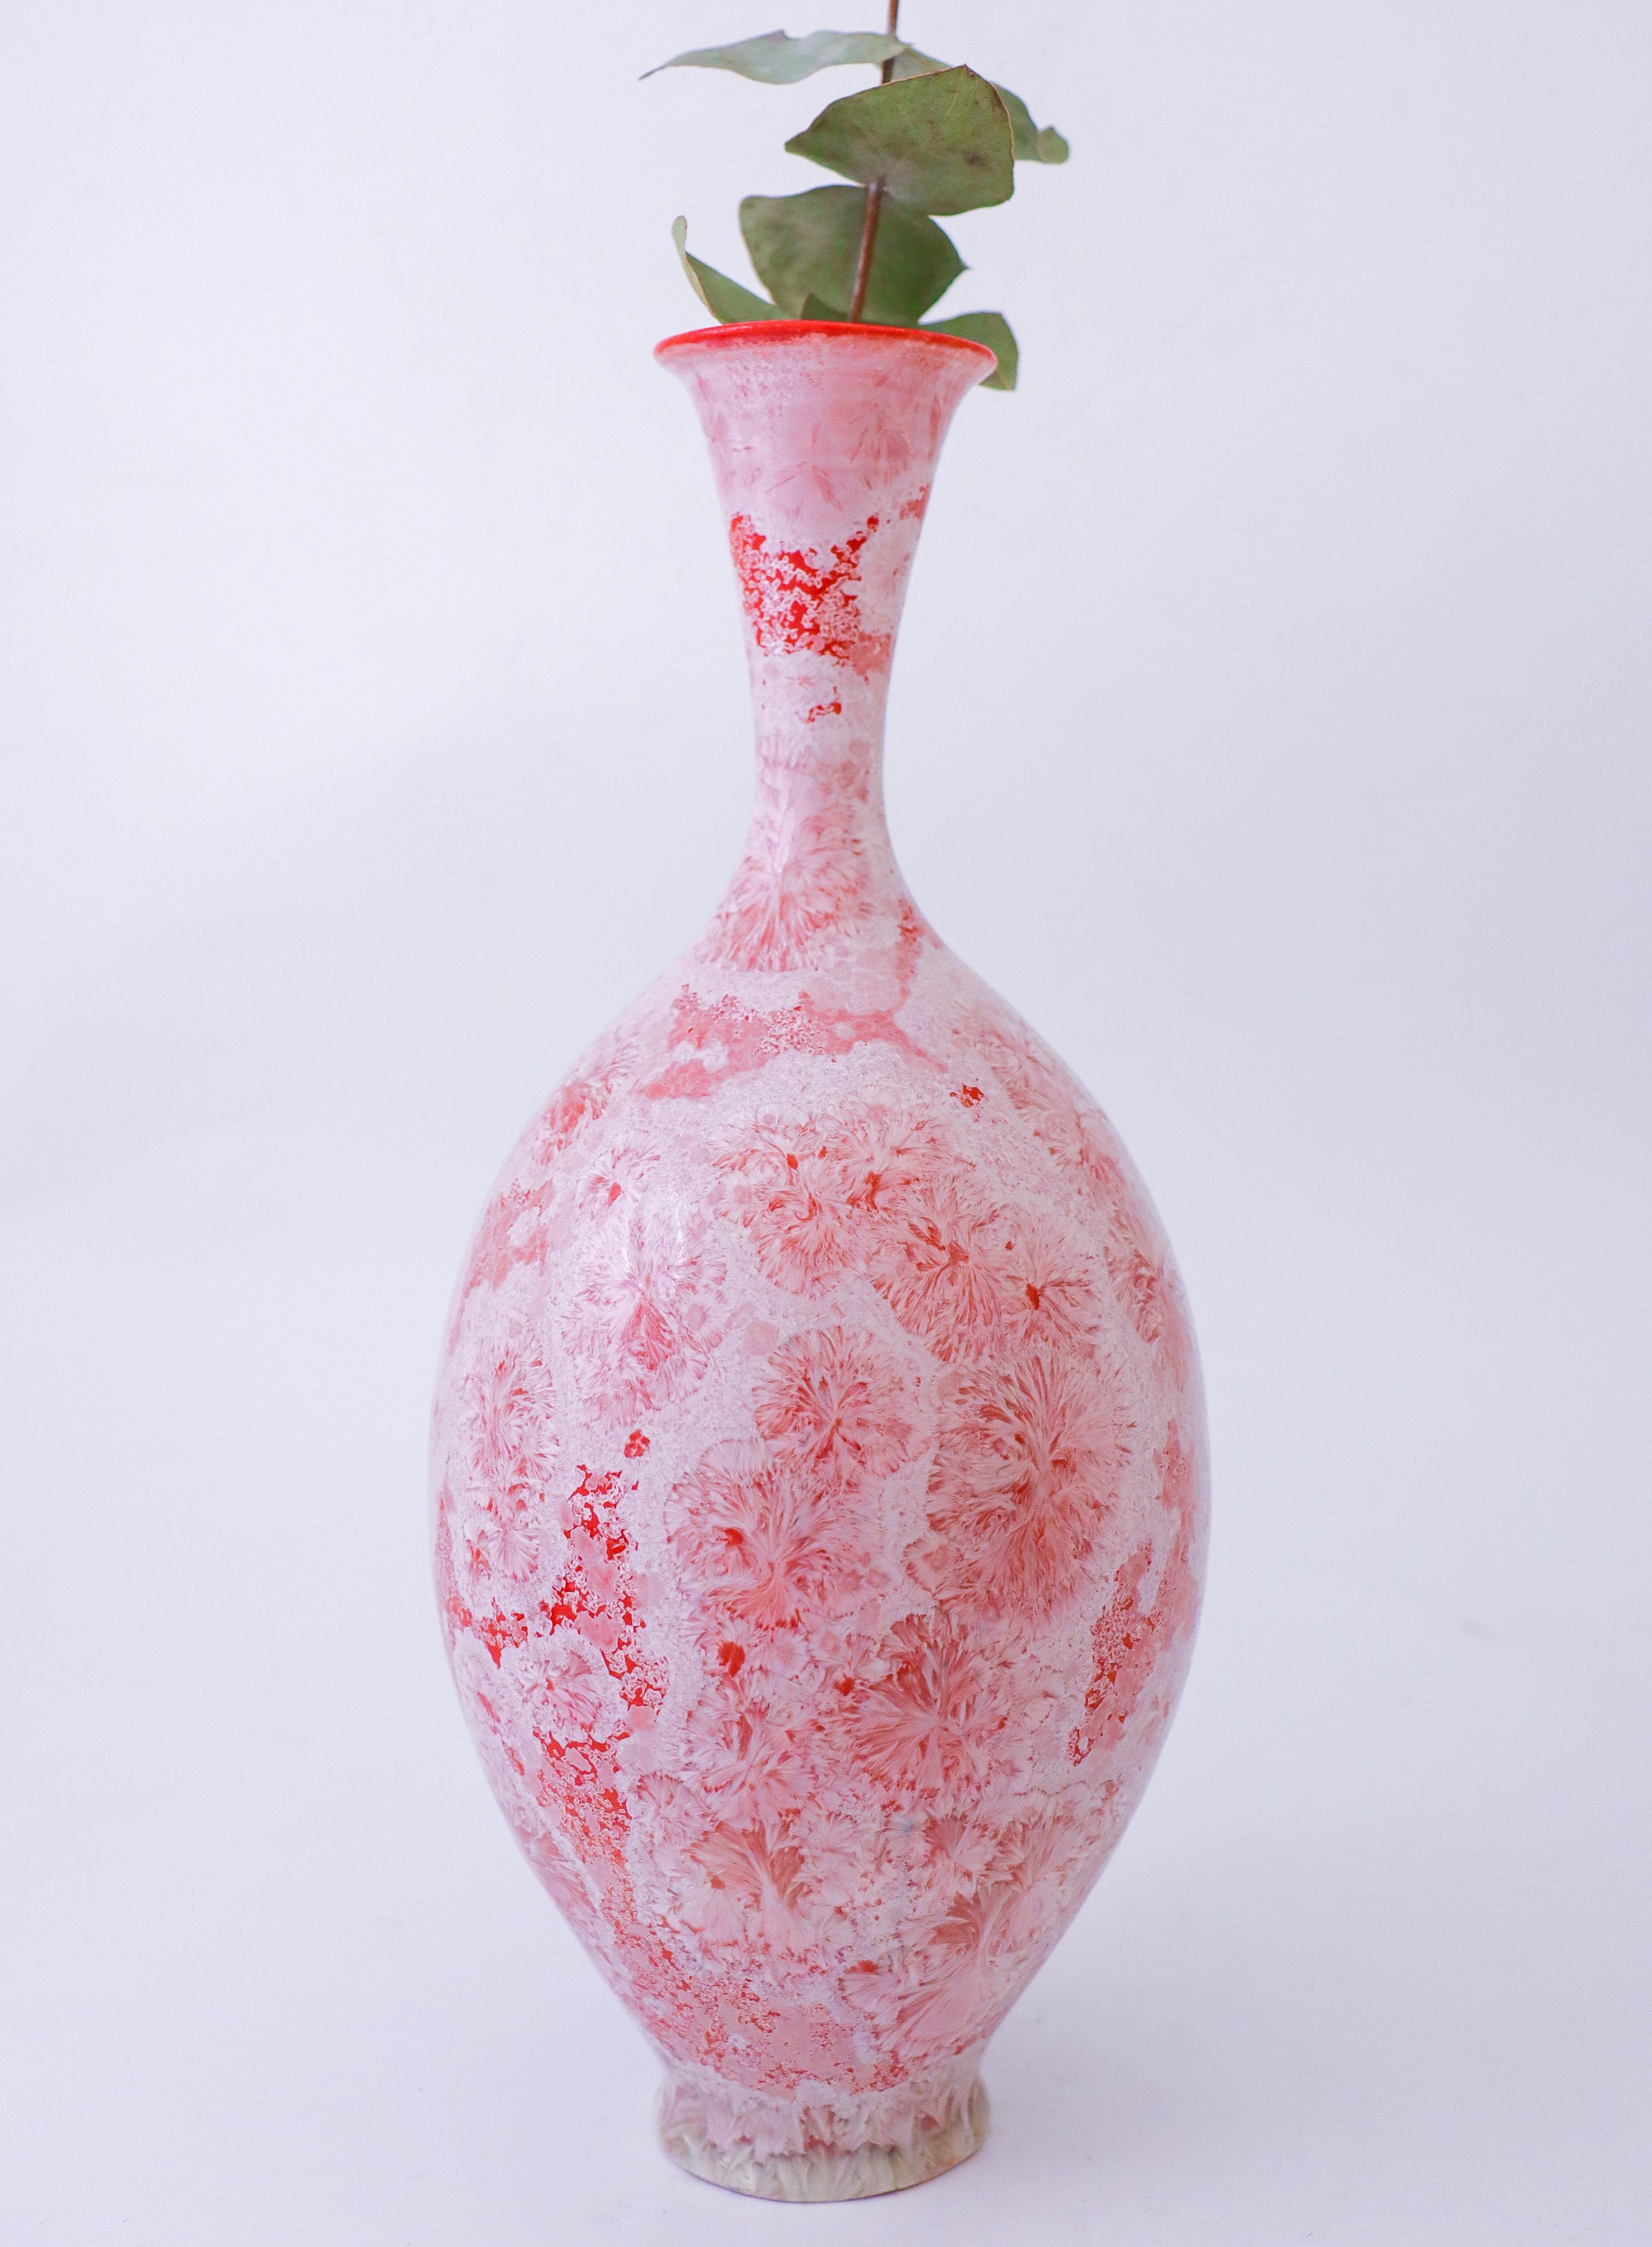 Isak Isaksson Red & White Ceramic Vase Crystalline Glaze Contemporary Christmas In Excellent Condition For Sale In Stockholm, SE